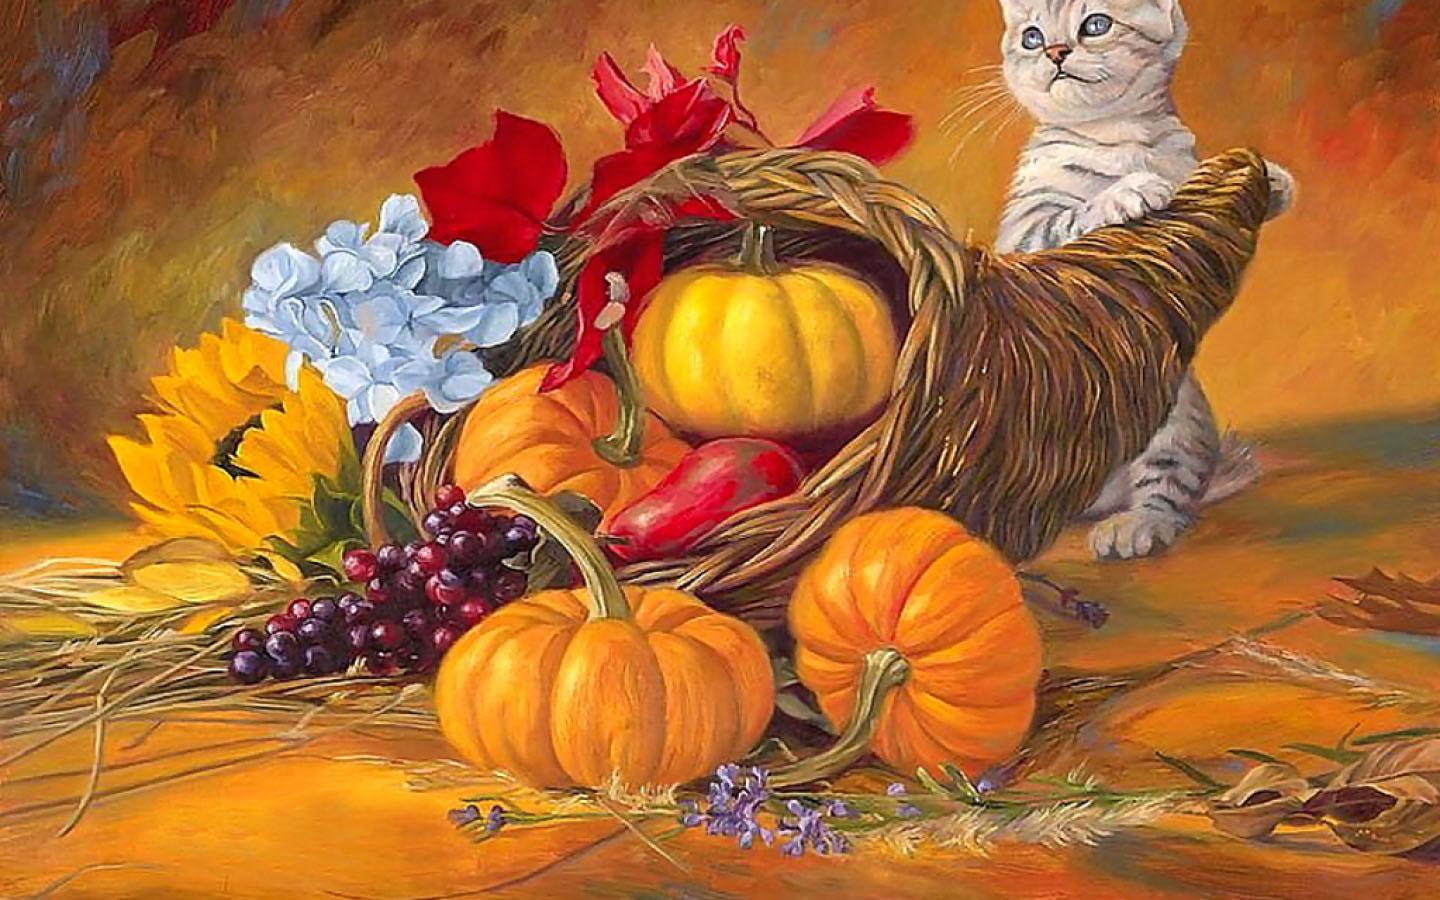 Happy Thanksgiving Wallpapers - Android Apps on Google Play